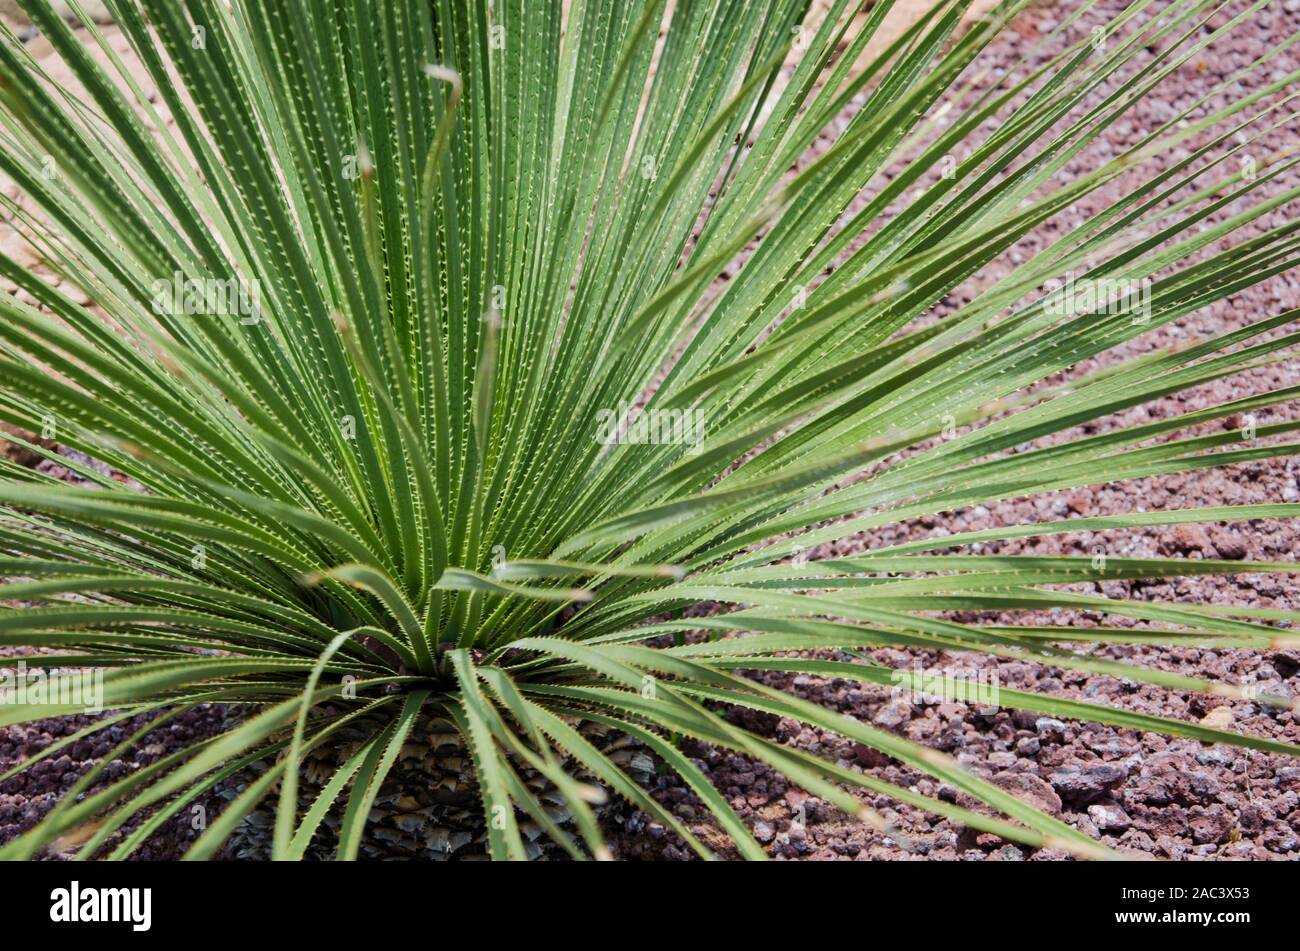 Long, sharp, thorny leaves of a green desert spoon, dasylirion acrotrichum Stock Photo